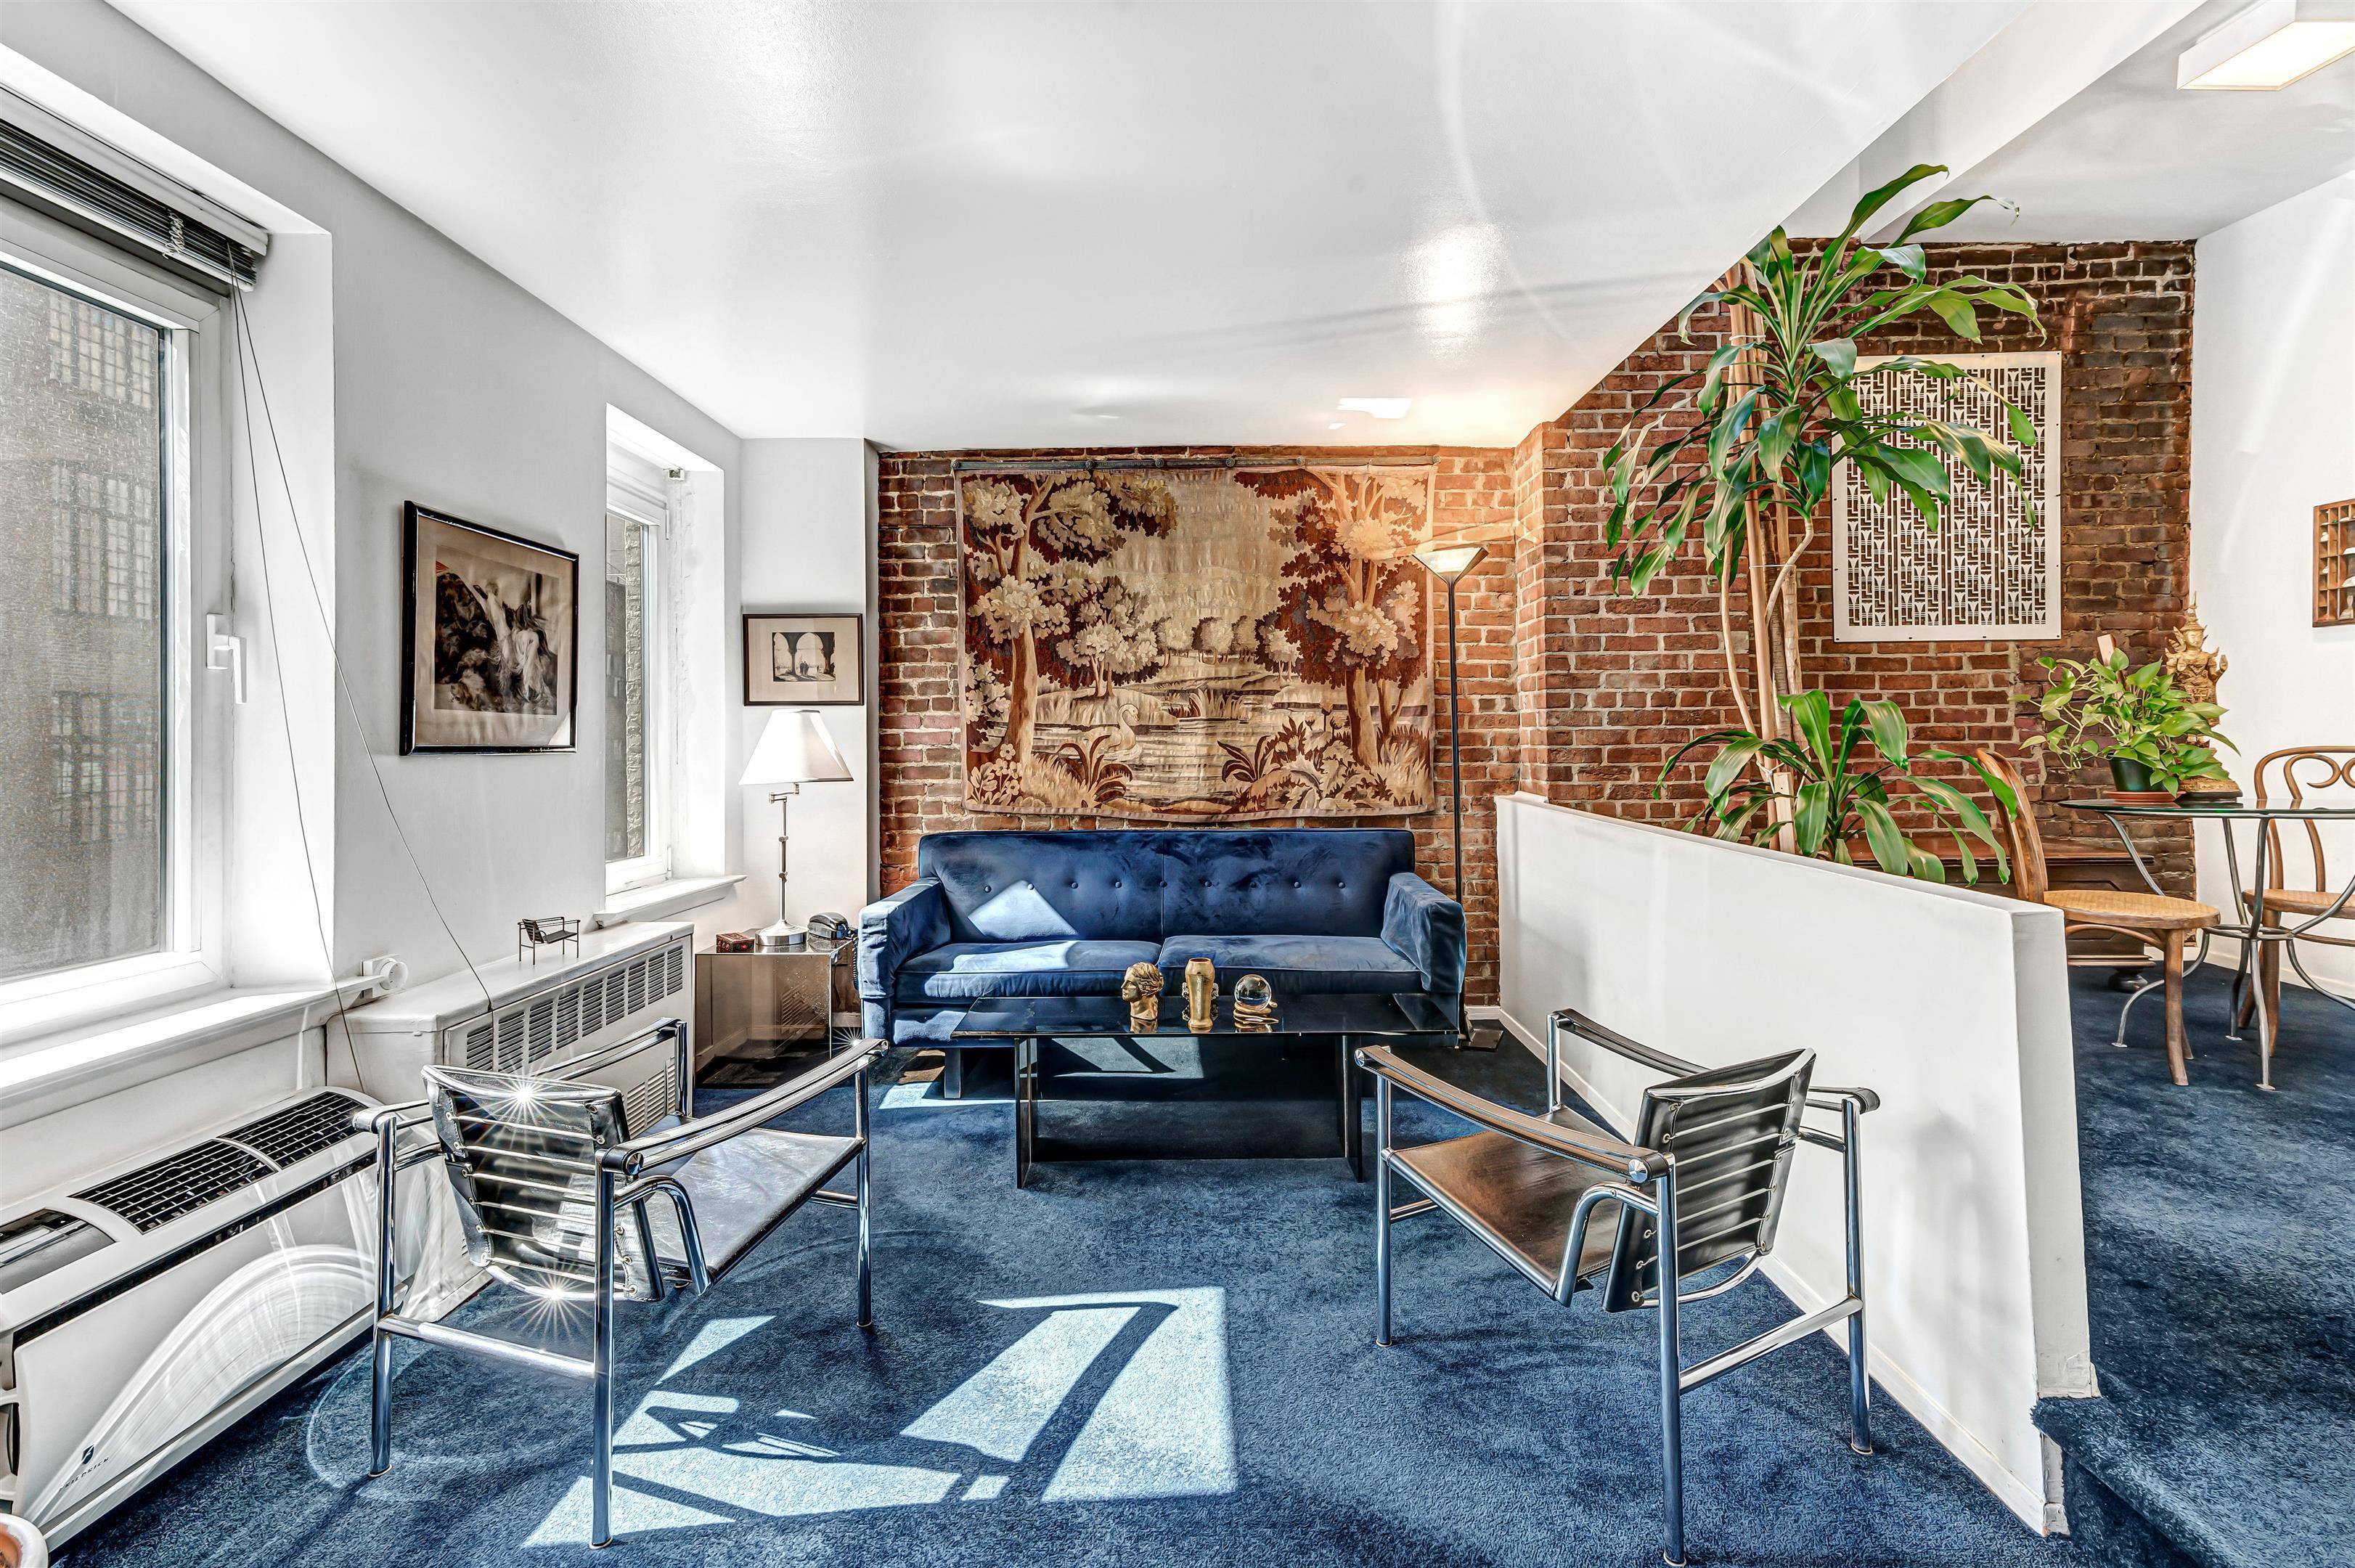 OFFER ACCEPTED NO MORE SHOWINGS Situated on the top floor of an elevator building, Apartment 5A is a charming Upper East Side duplex that offers an exceptional living experience marked ...